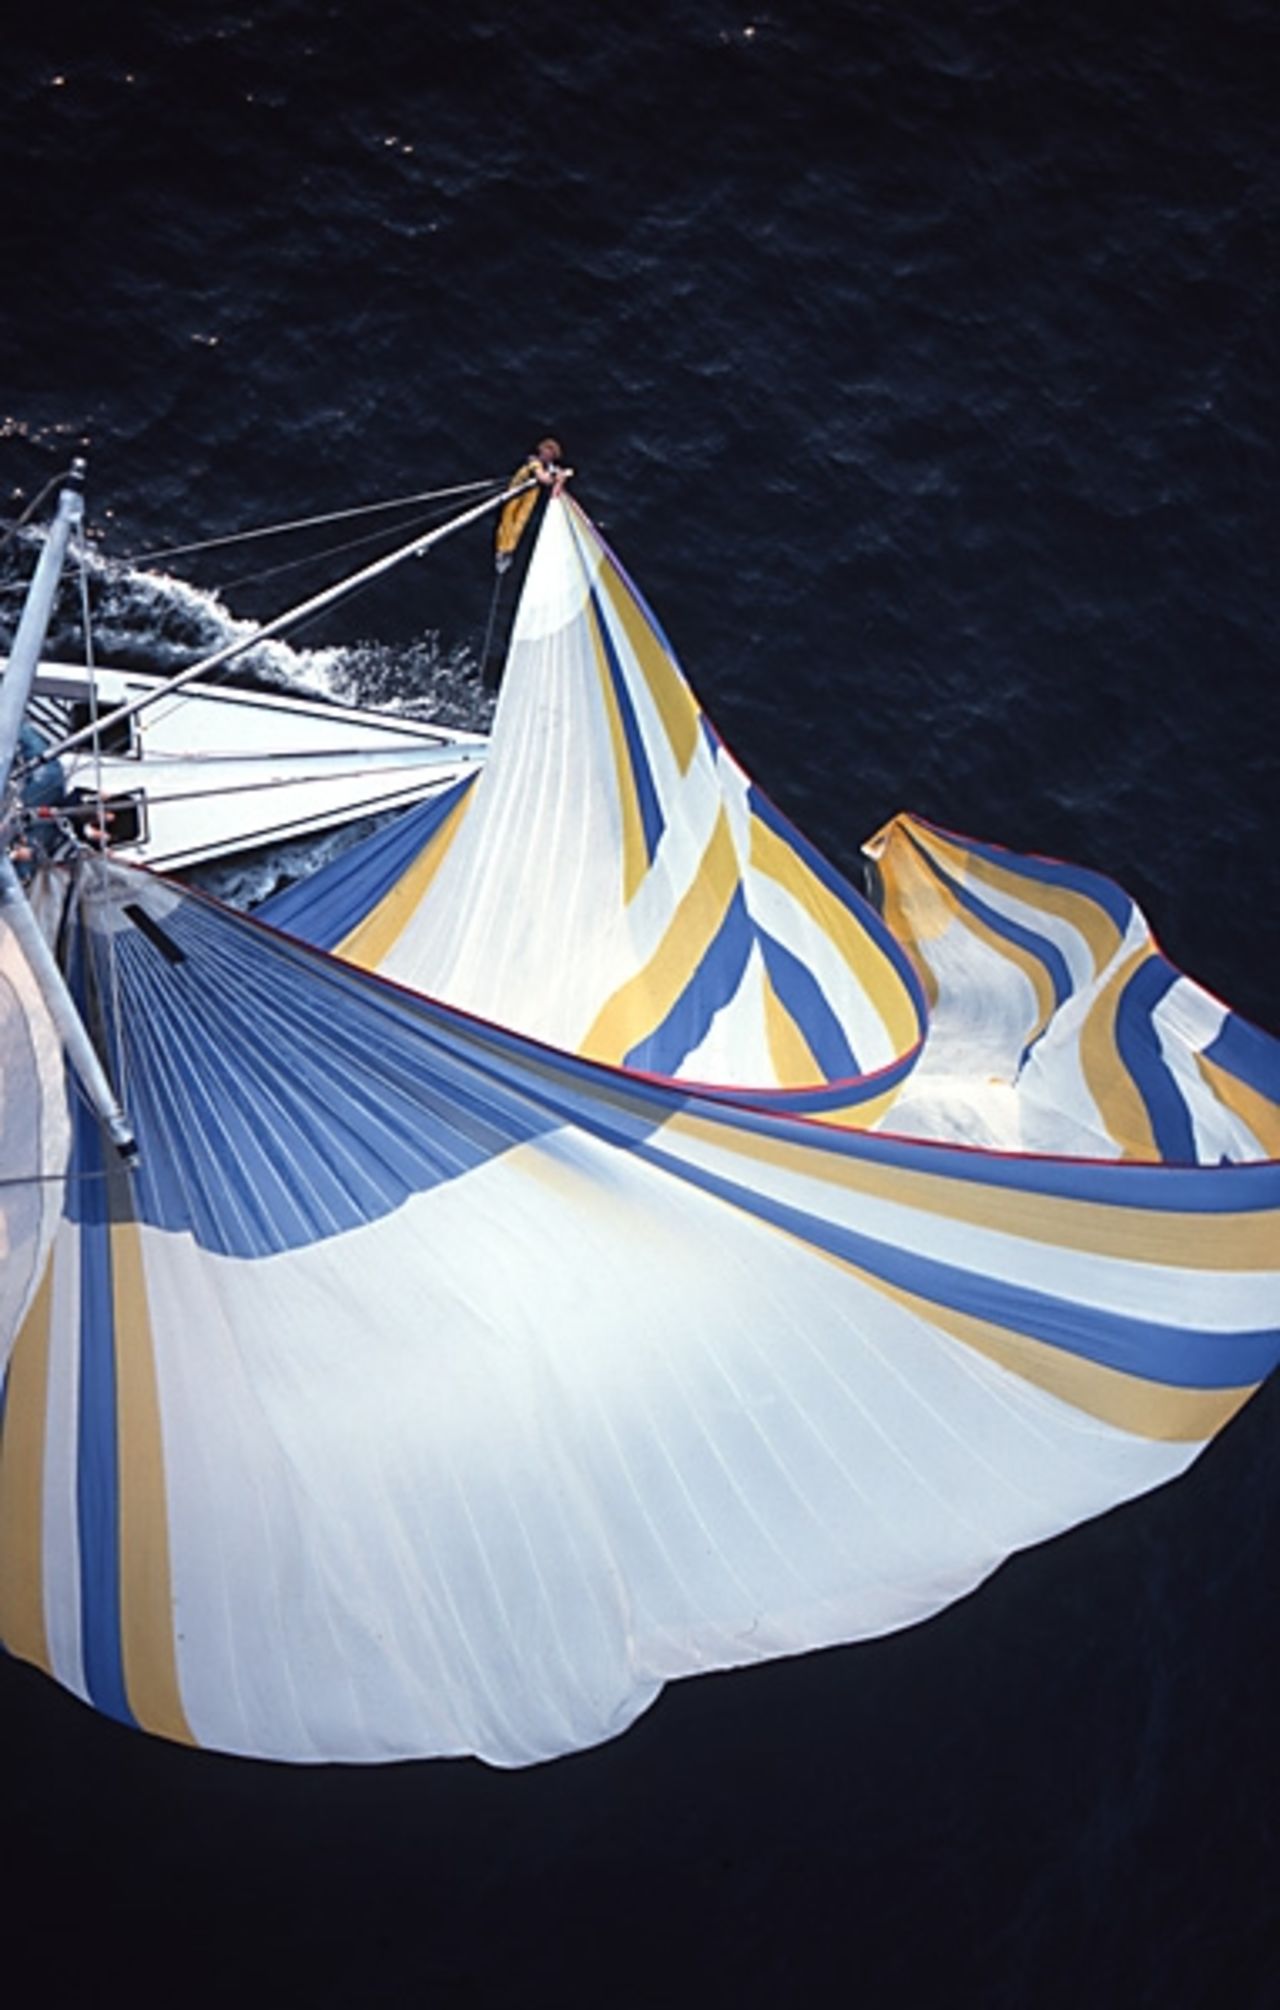 Kos is a household name in sailing photography circles, having been shortlisted for the prestigious British Sports Photography Awards, British Nautical Awards and exhibited at London's Getty Gallery. 